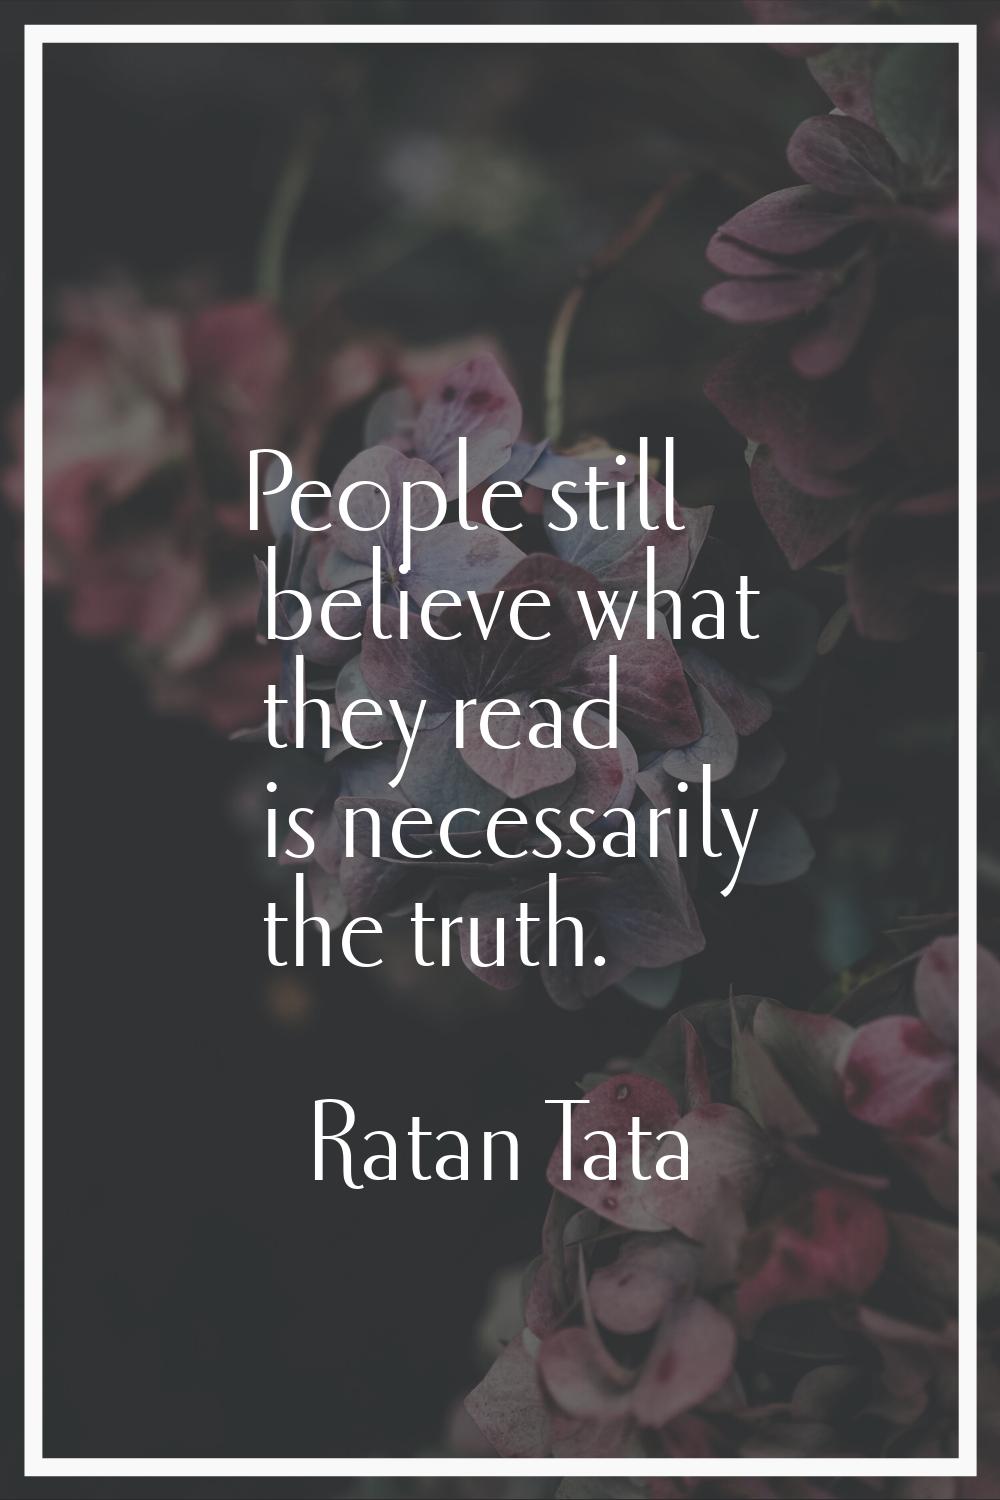 People still believe what they read is necessarily the truth.